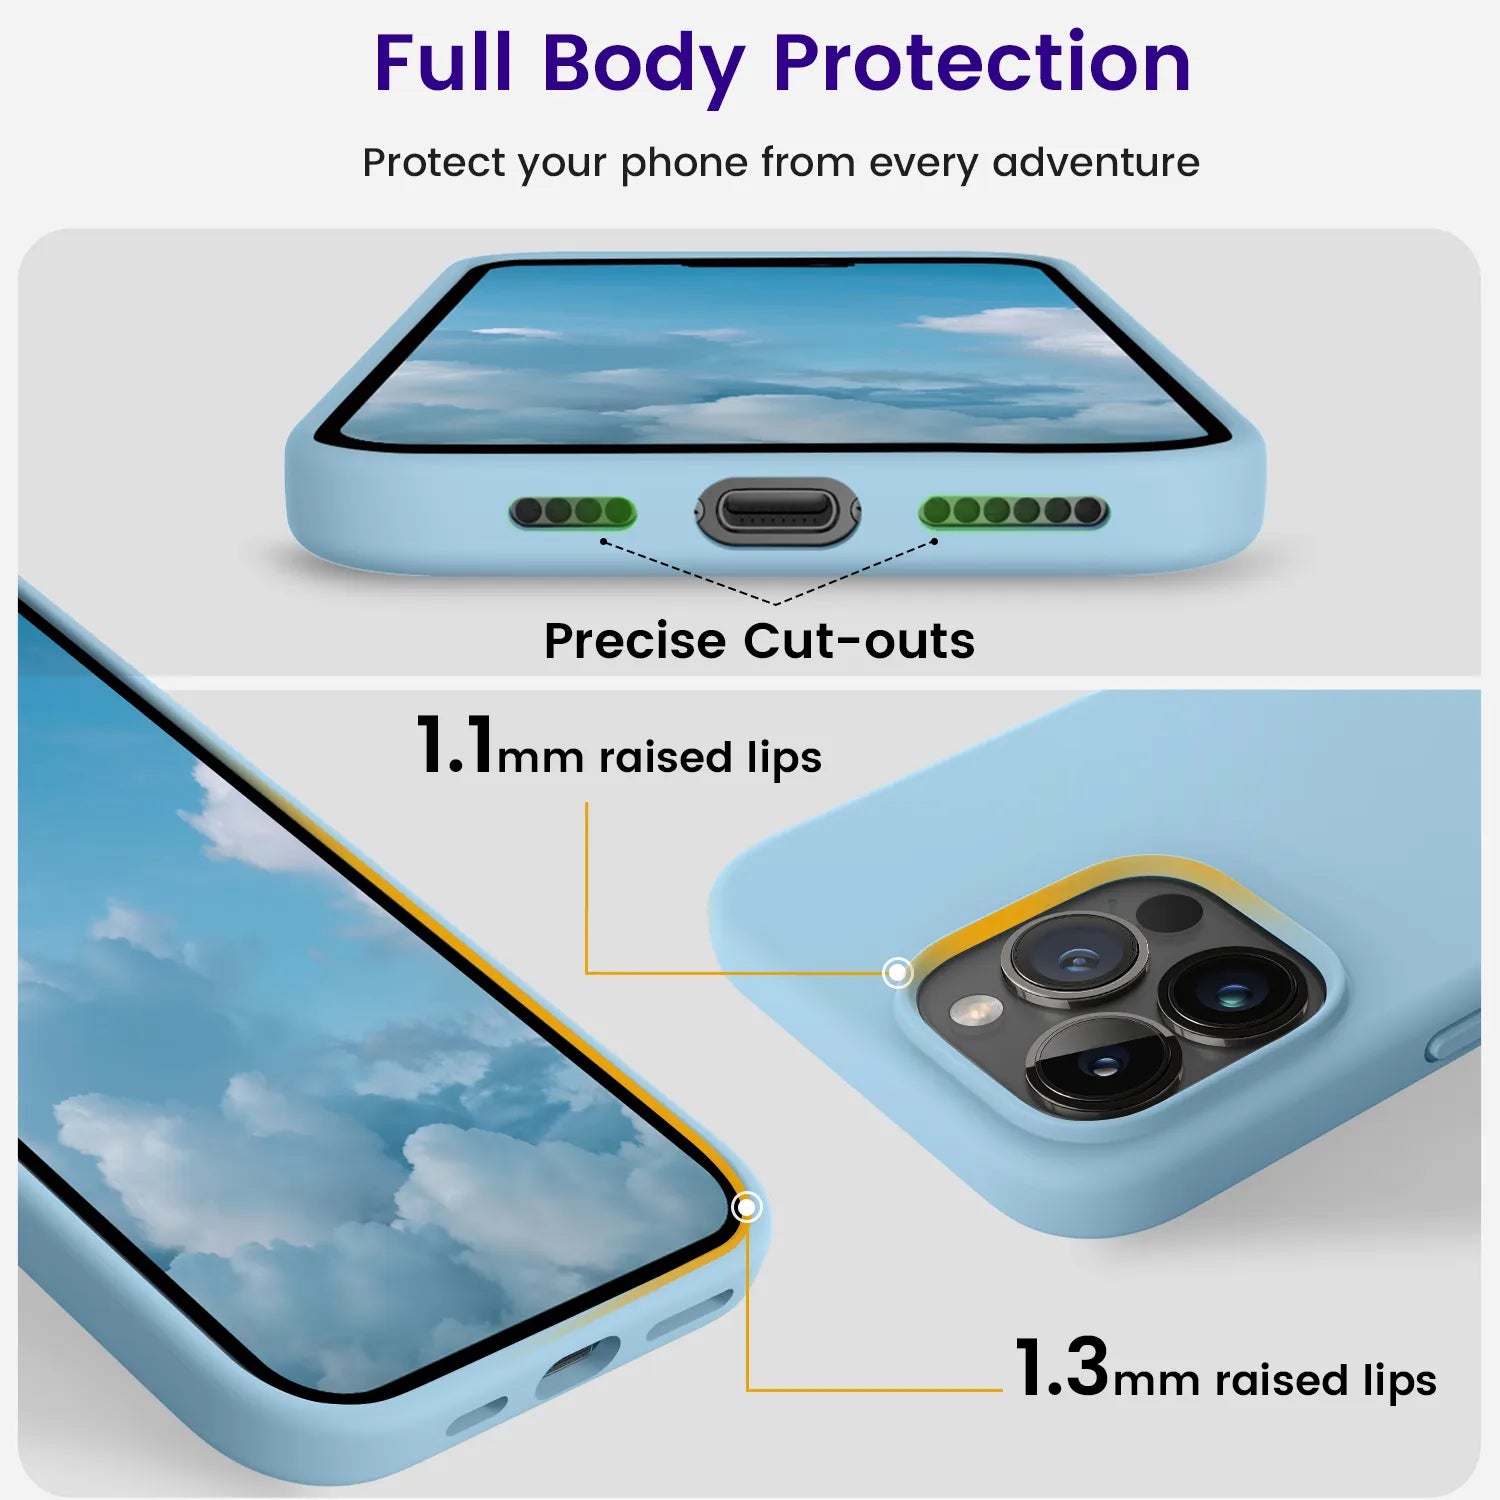 The Best Apple iPhone 13 Pro Max Silicone Case - OTOFLY